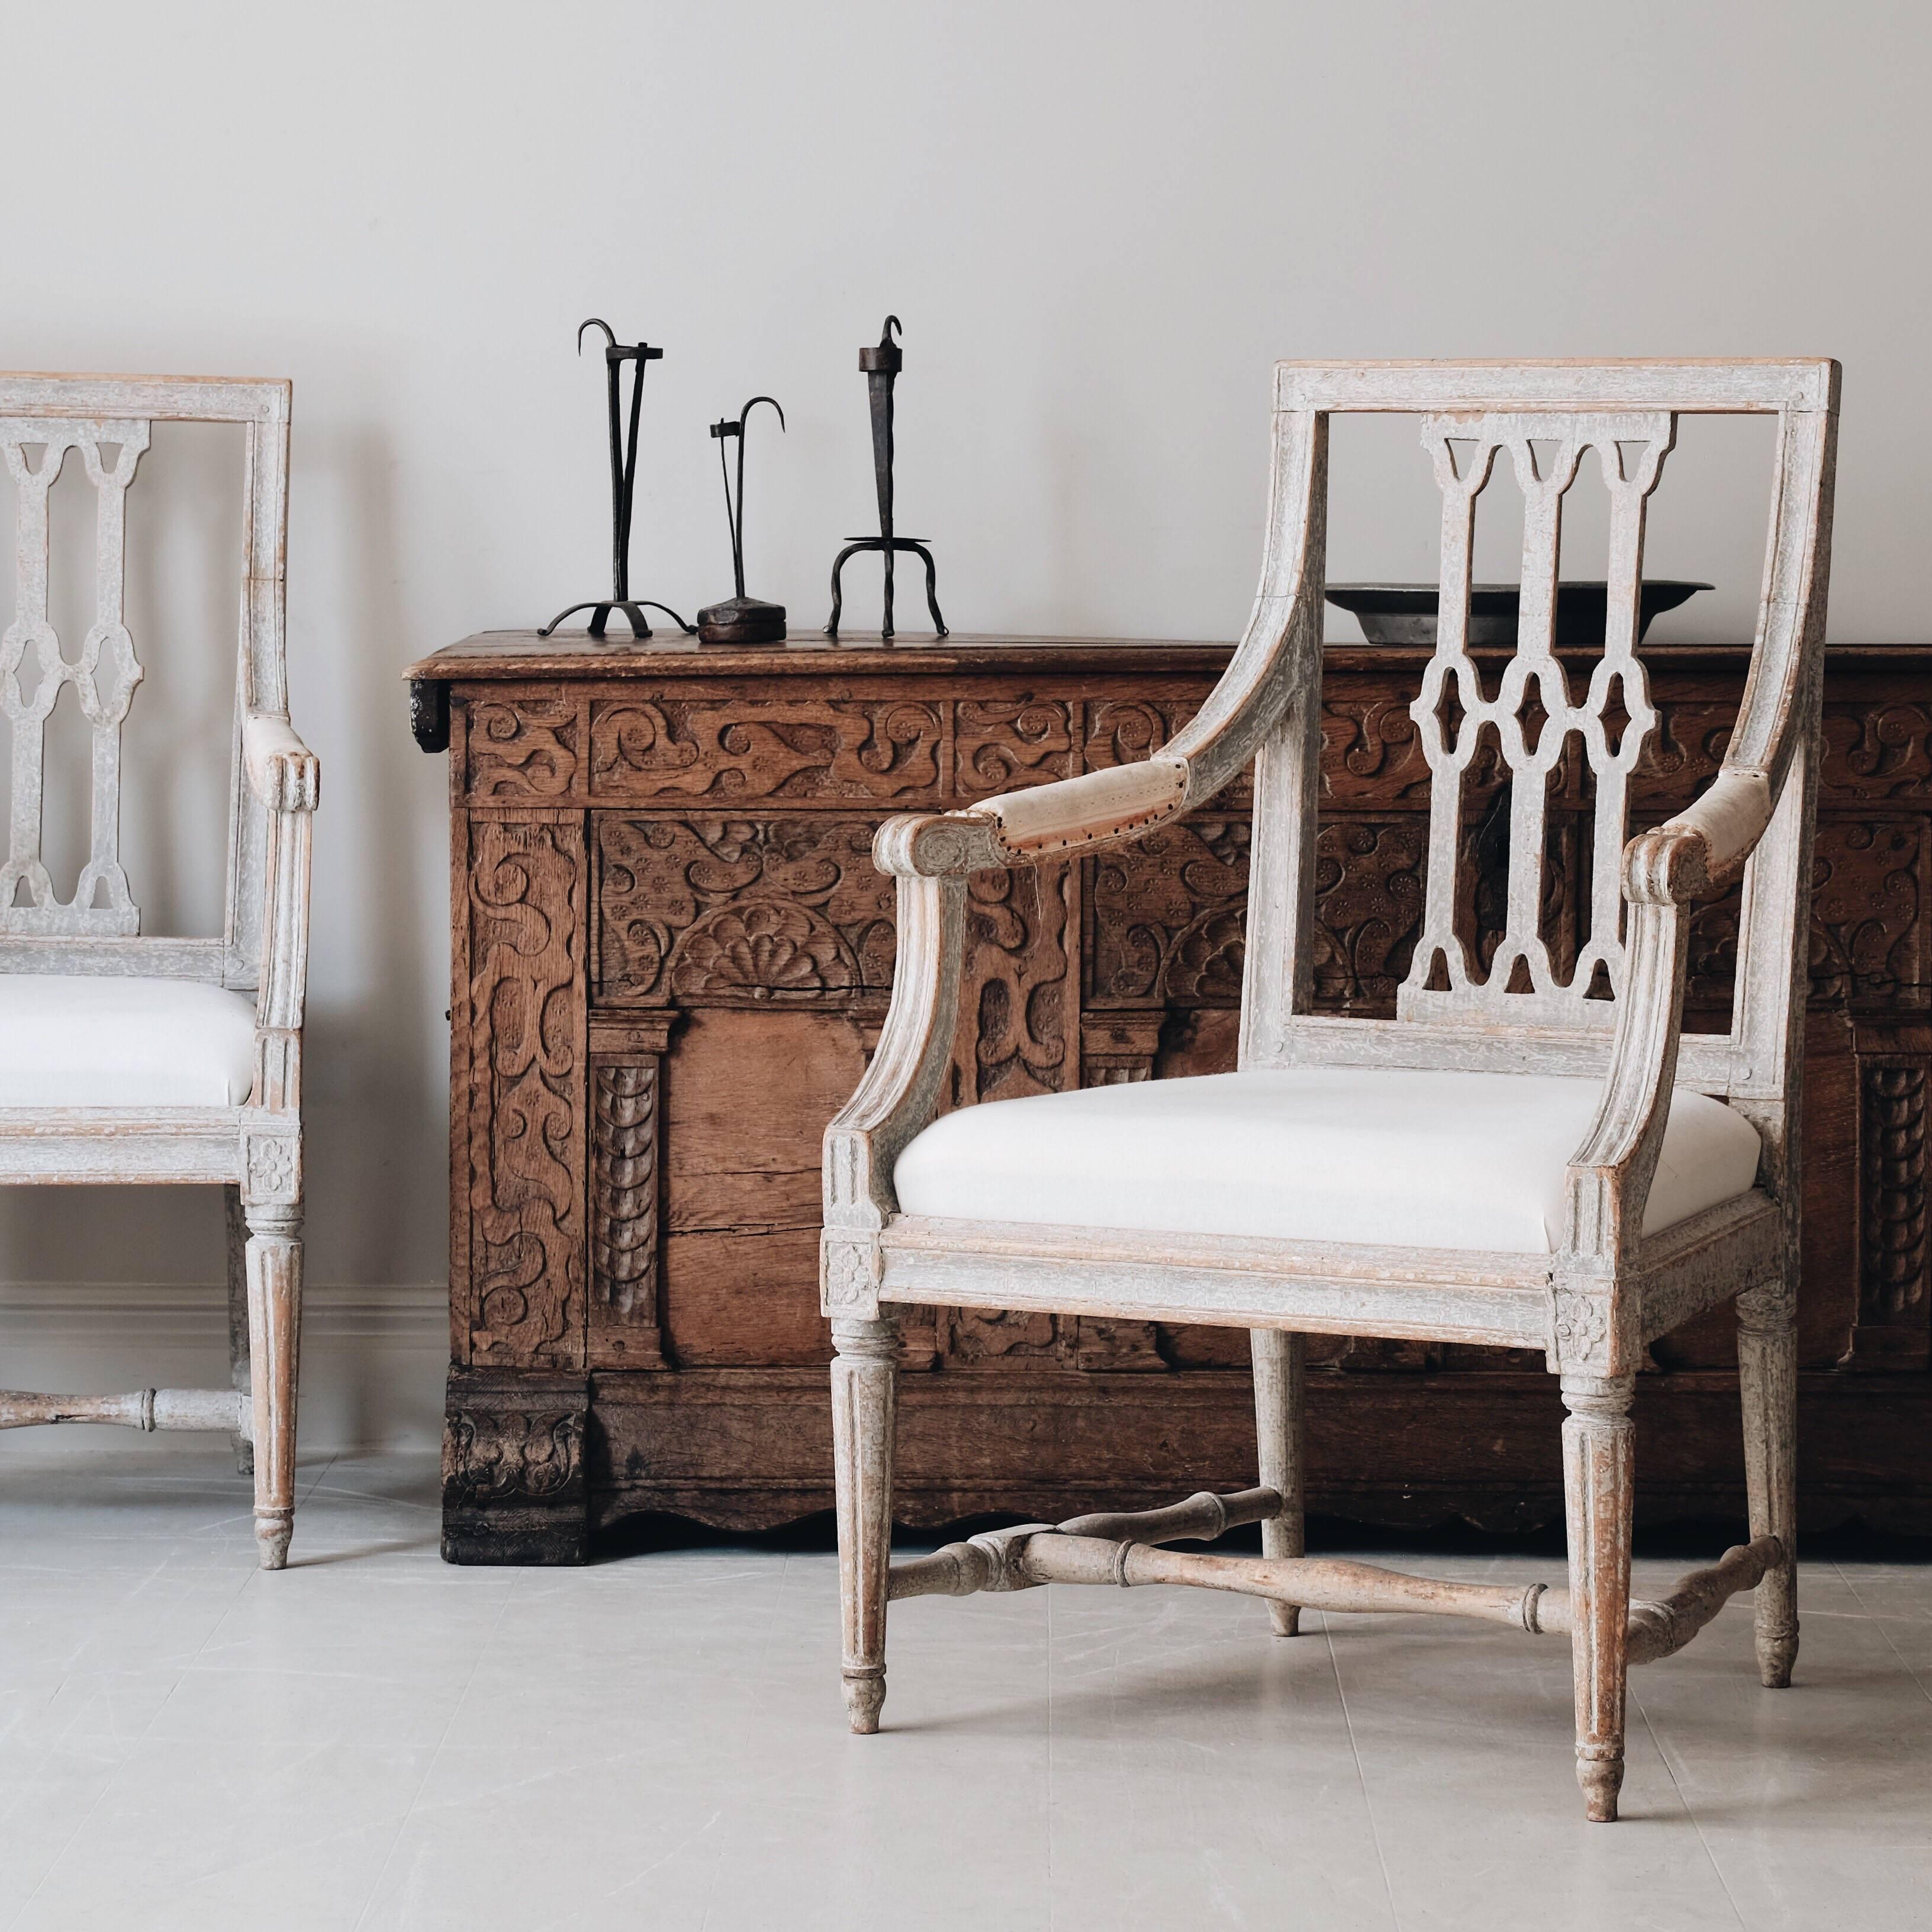 Pair of fine 18th century Gustavian armchairs in original color and a very unusual back splat. Marked with the seal of Stockholm chair maker’s guild, circa 1790, Stockholm Sweden.